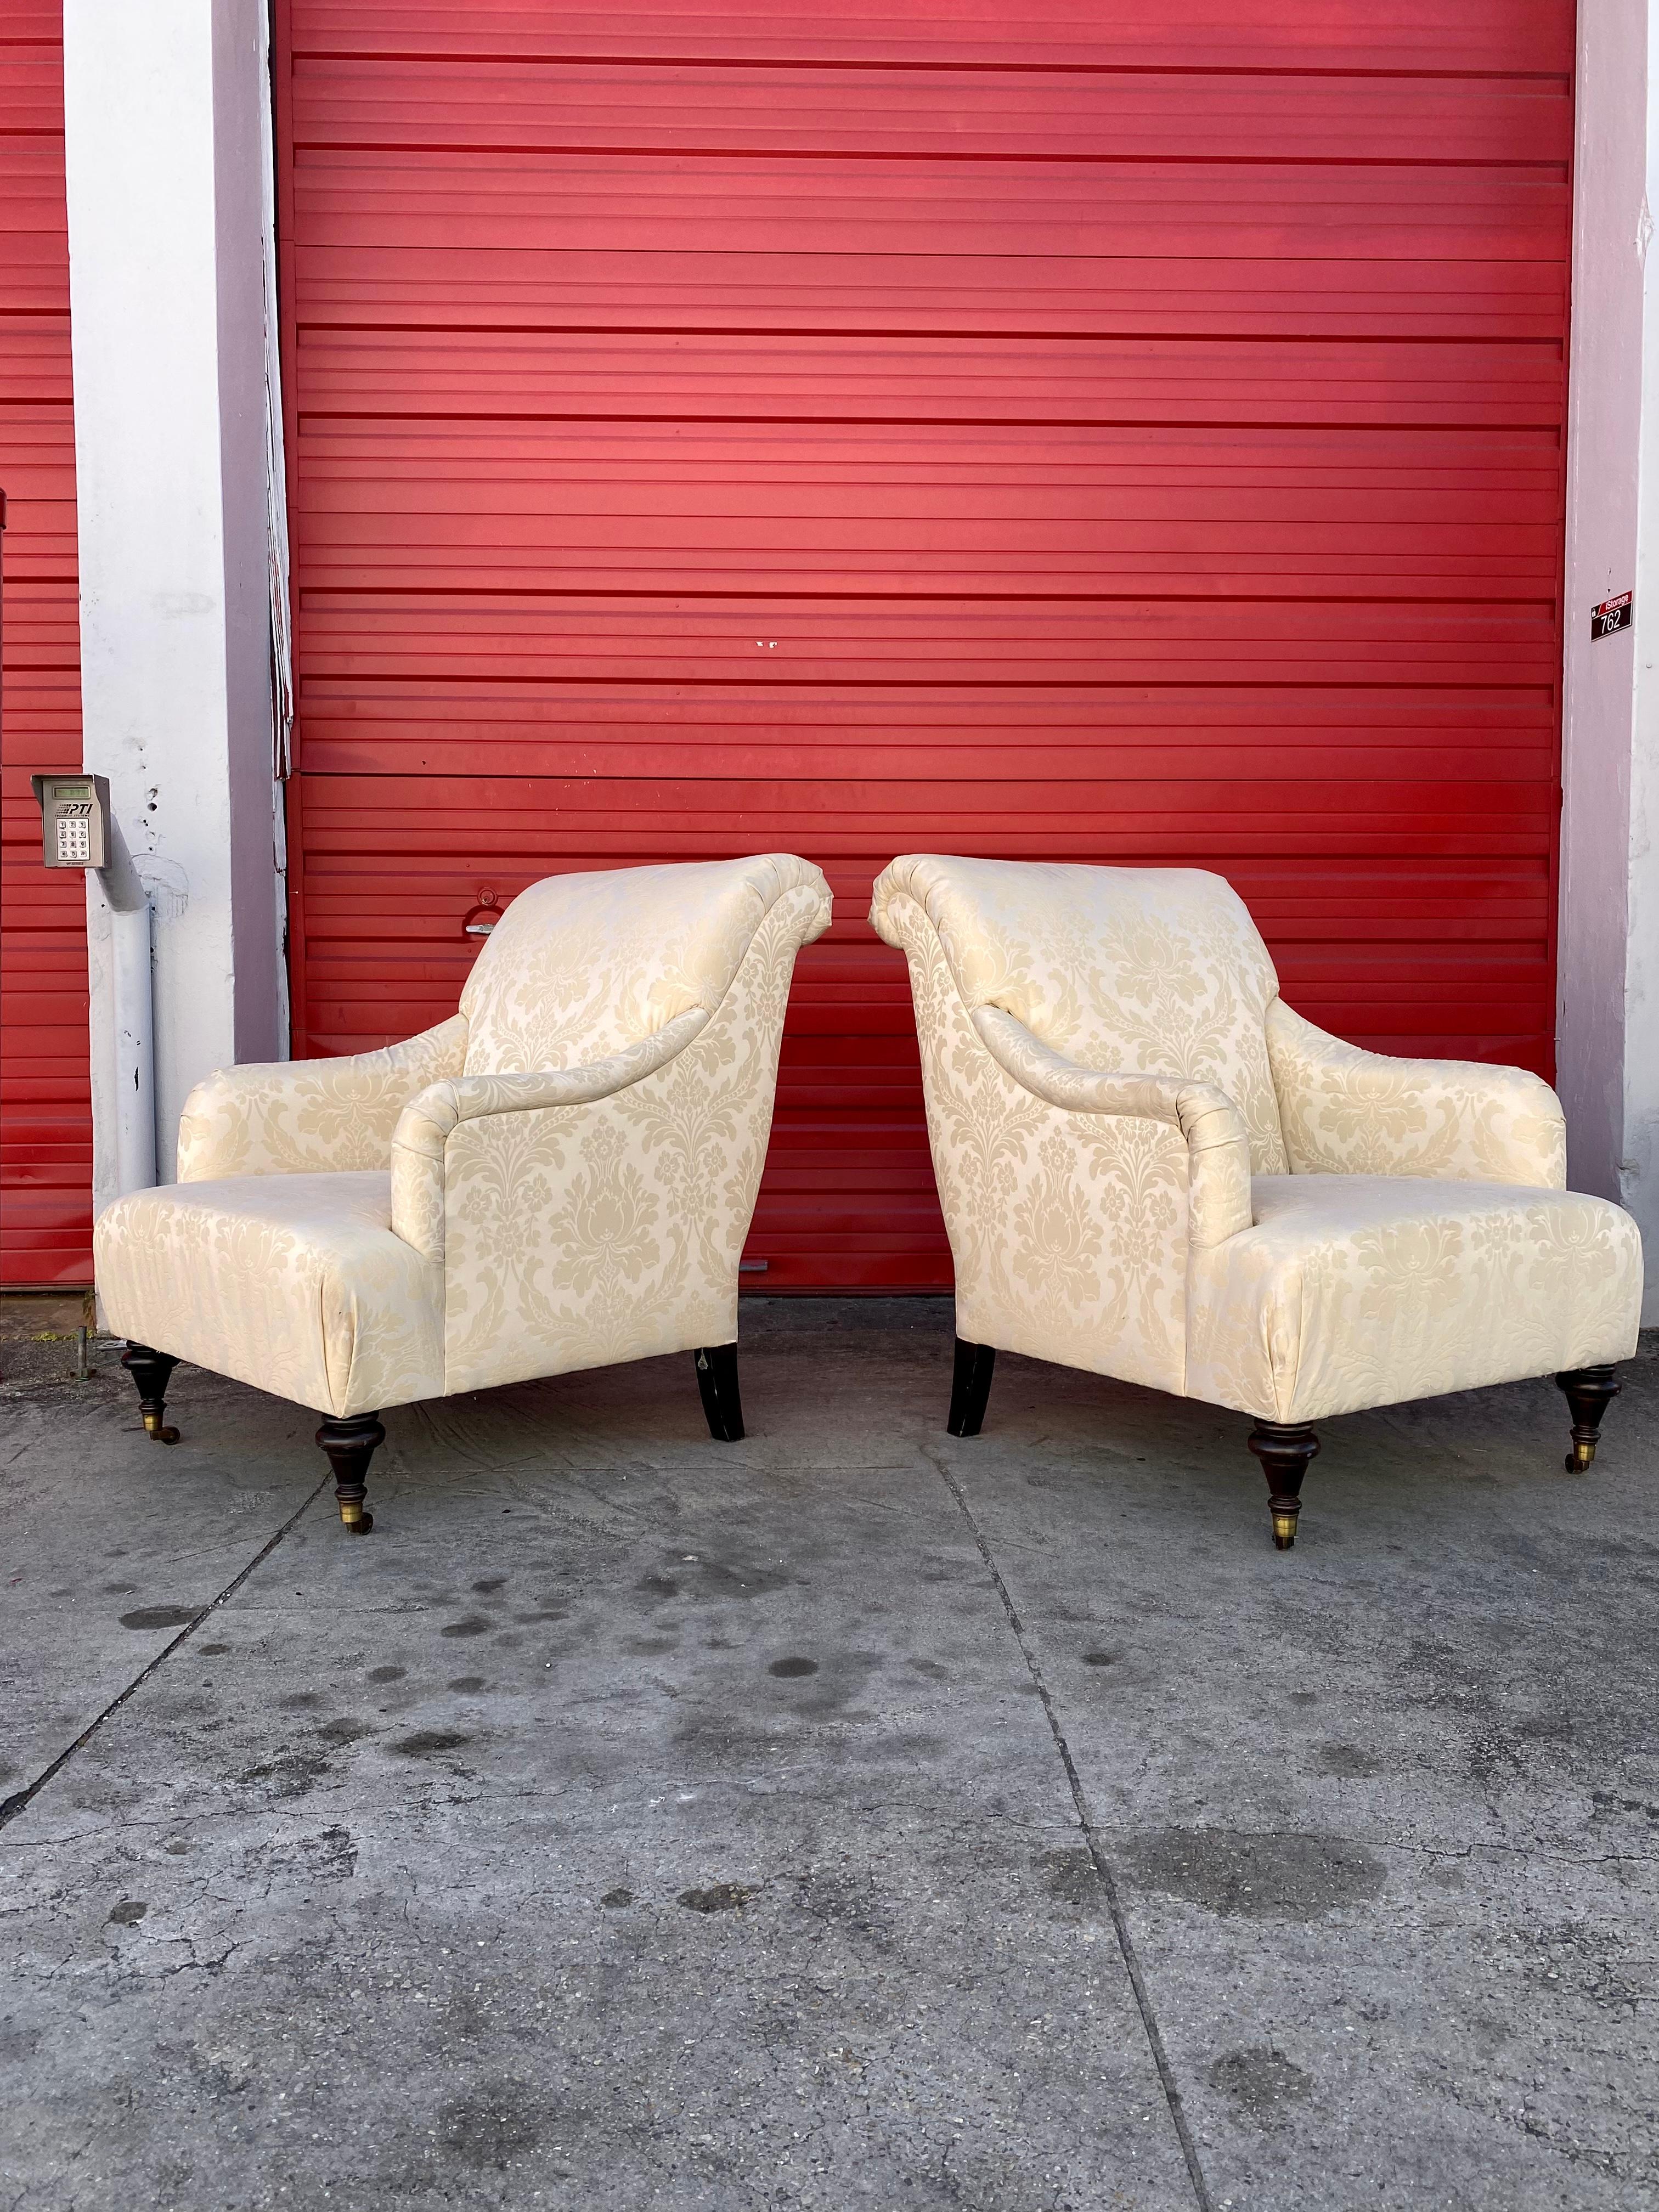 Contemporary Thomasville English Light Beige Damask Silk Chairs on Castors, Set of 2 For Sale